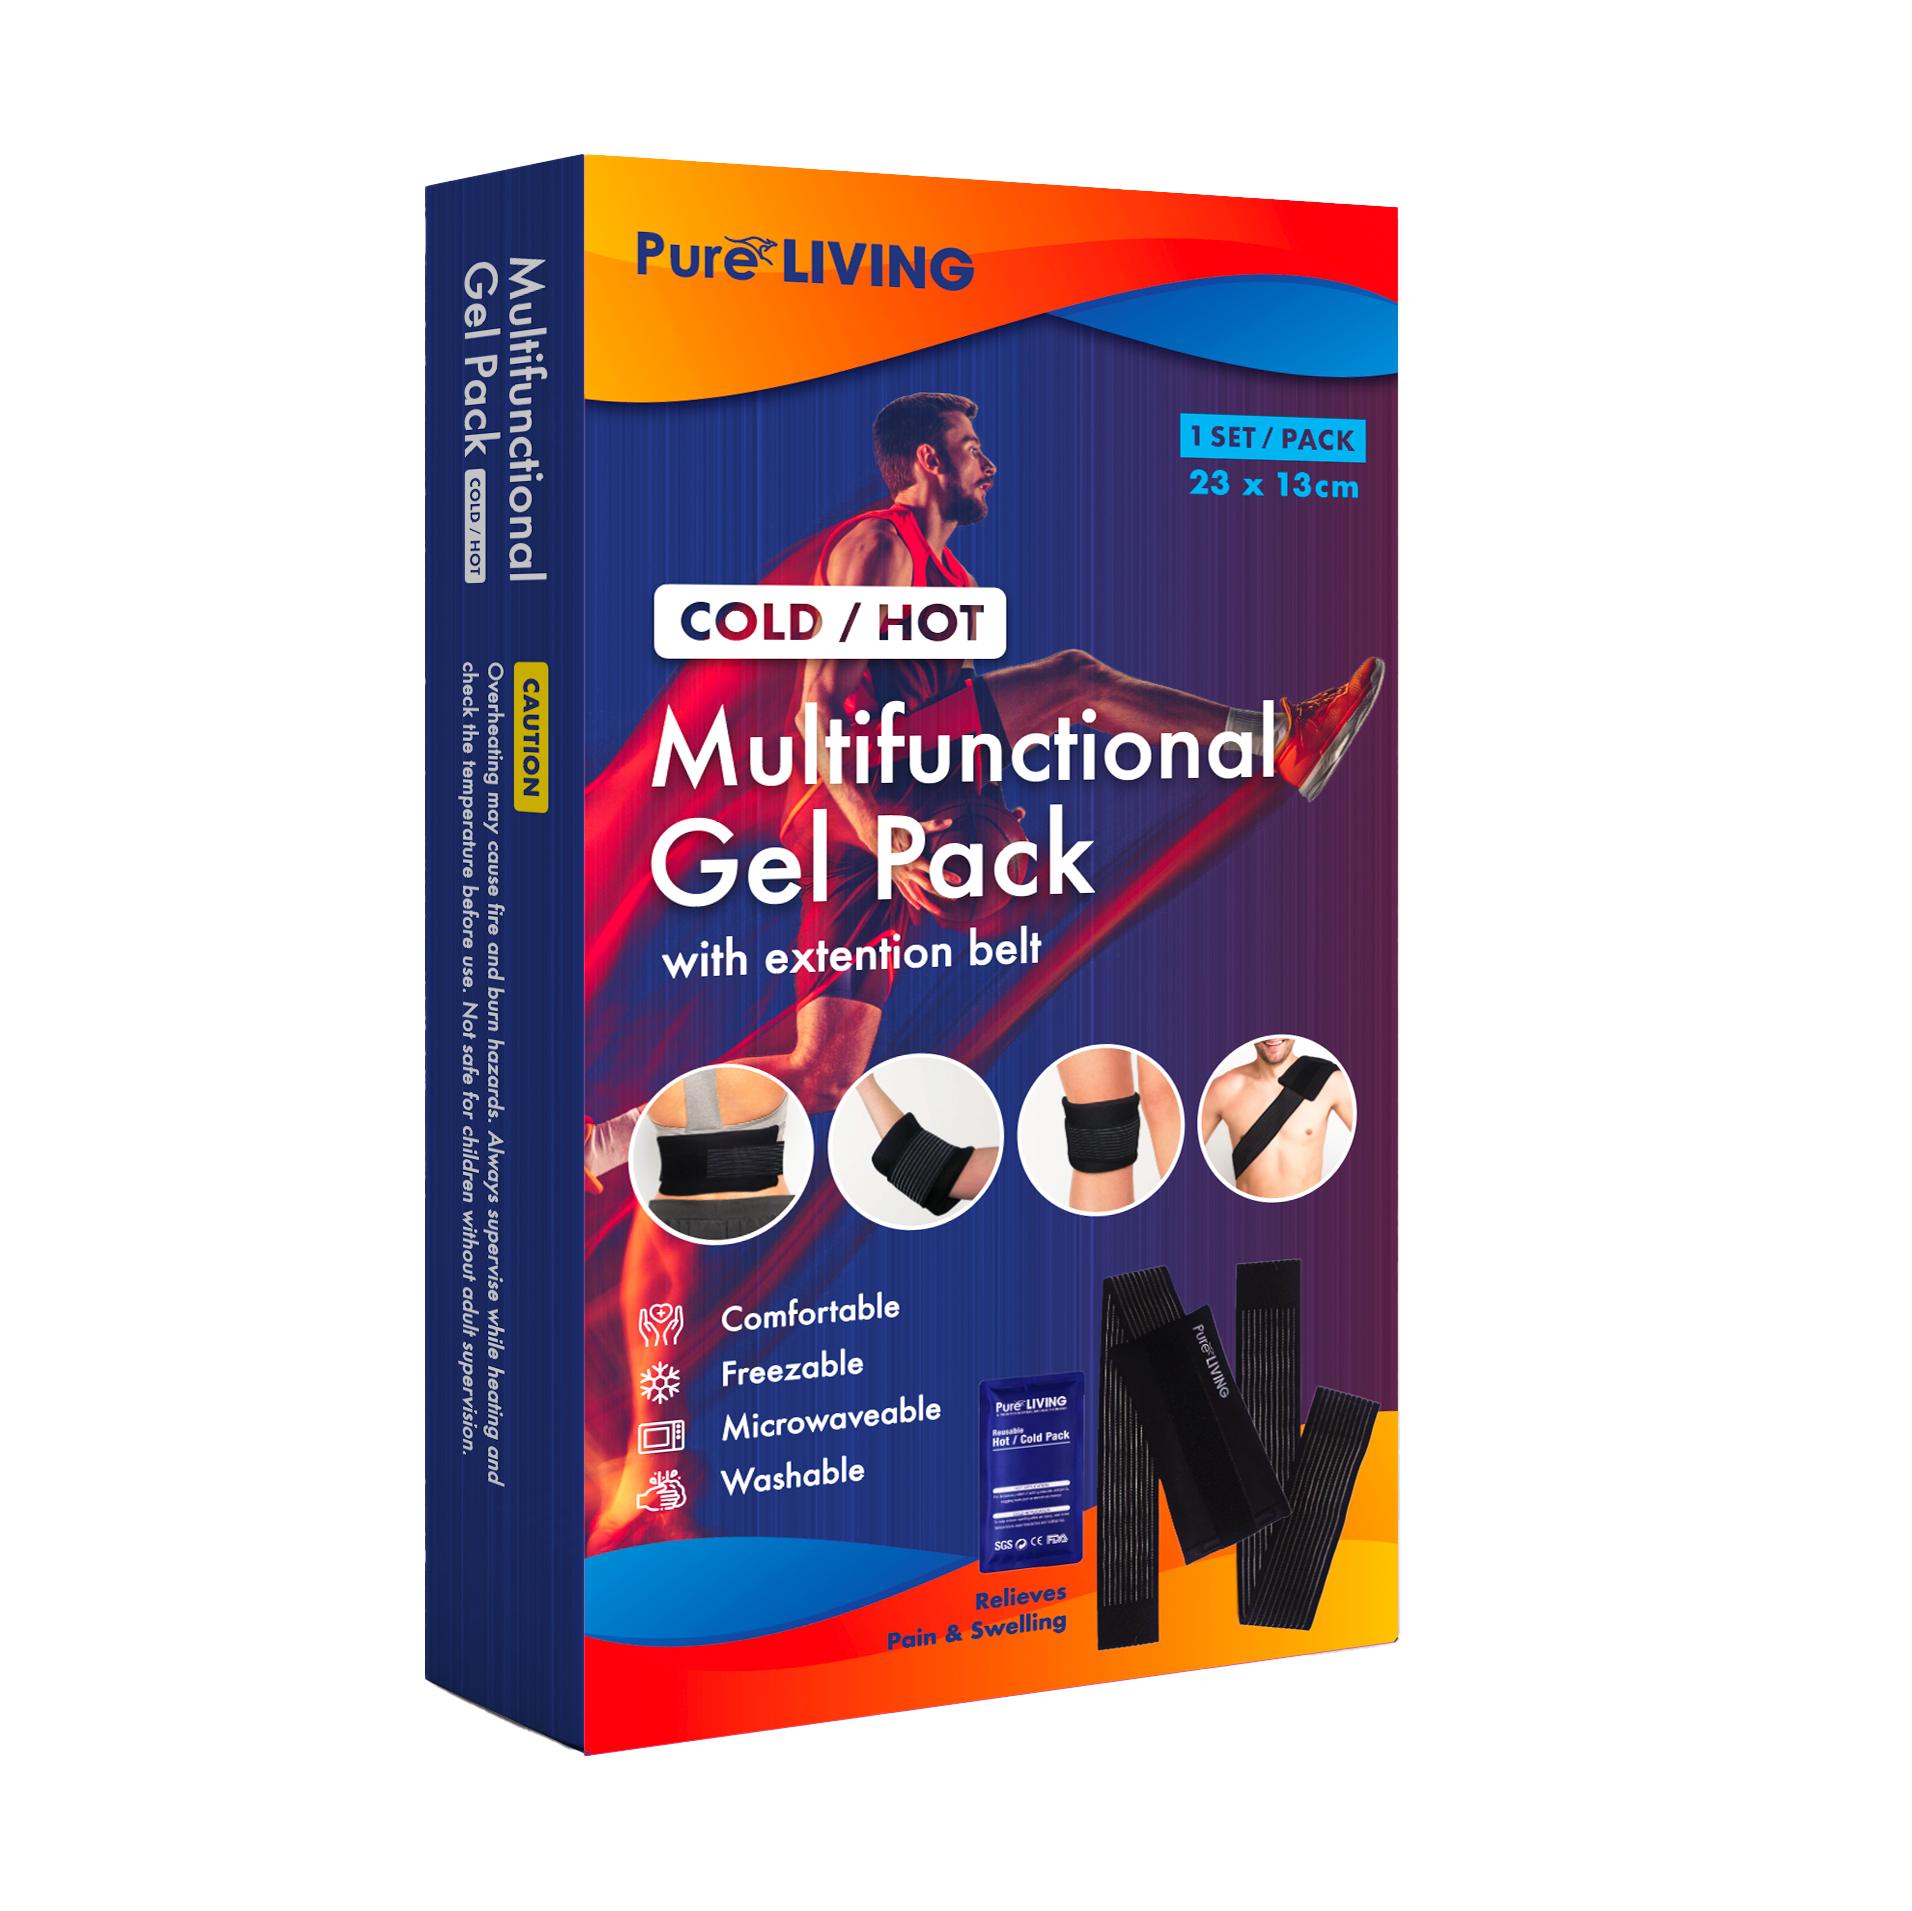 Cold/Hot Multifunctional Gel Pack with warp and strap